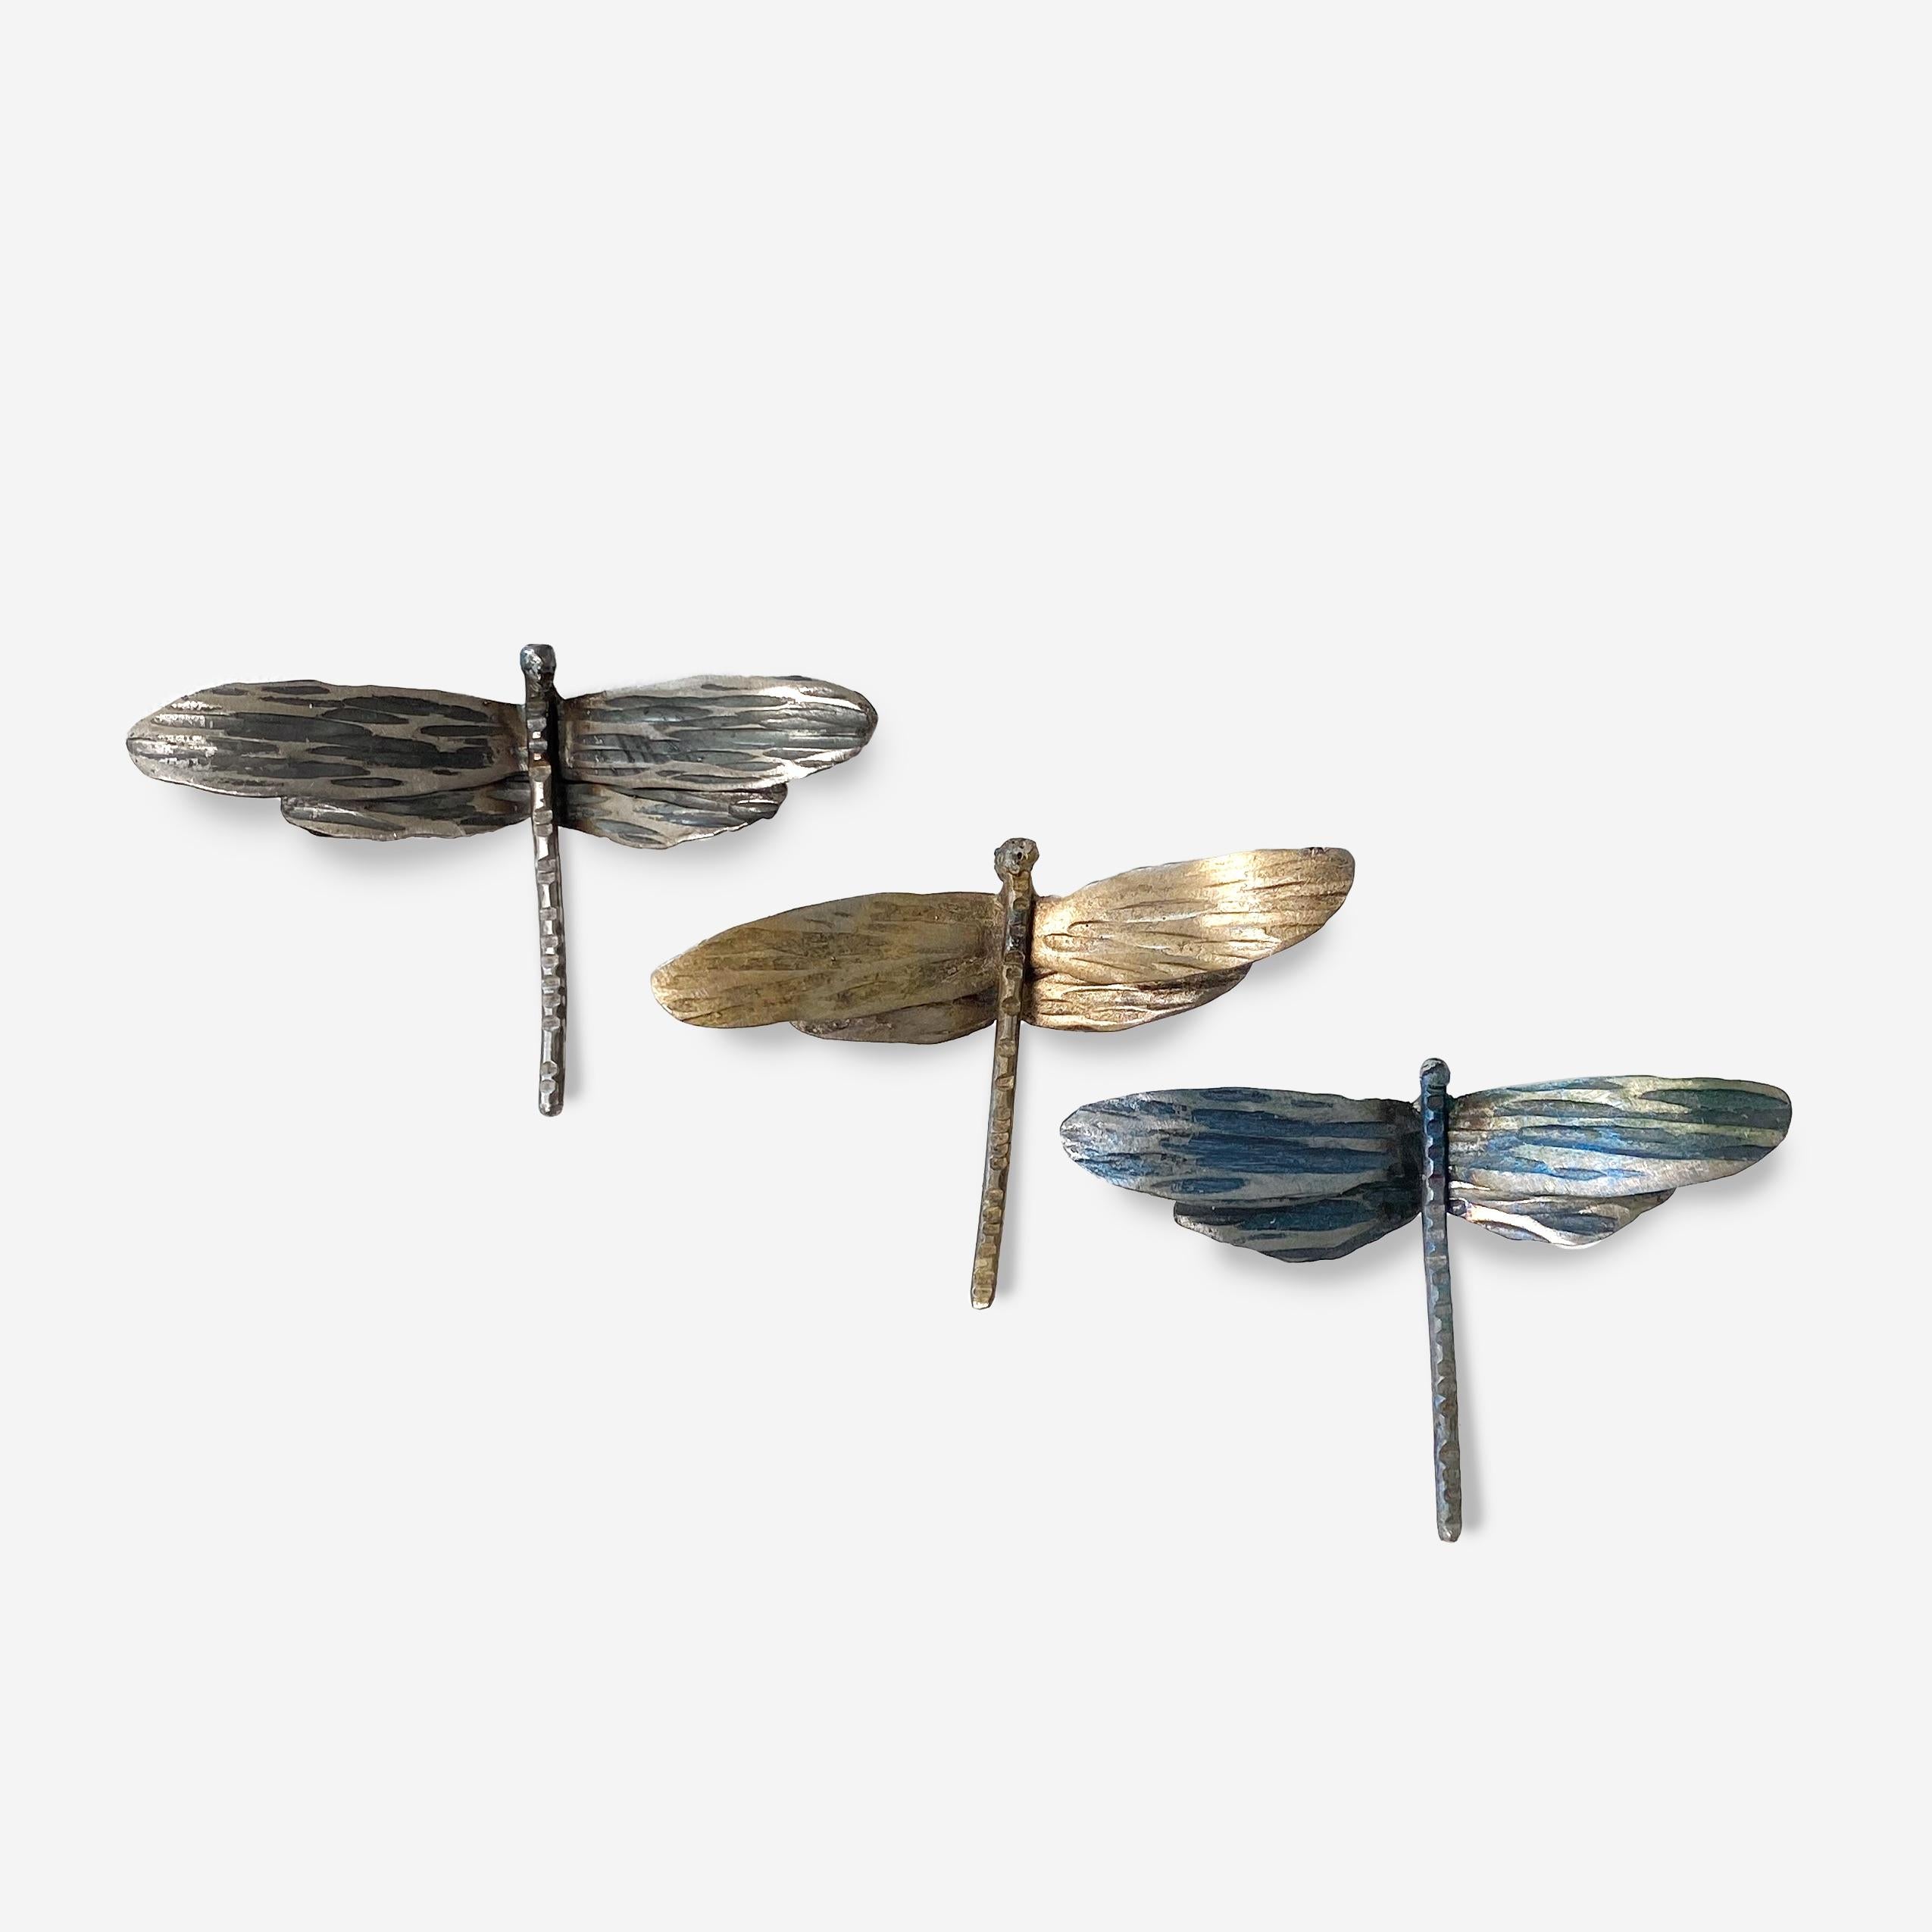 American Dragonfly Wall Sculpture, Horizontal Flight For Sale